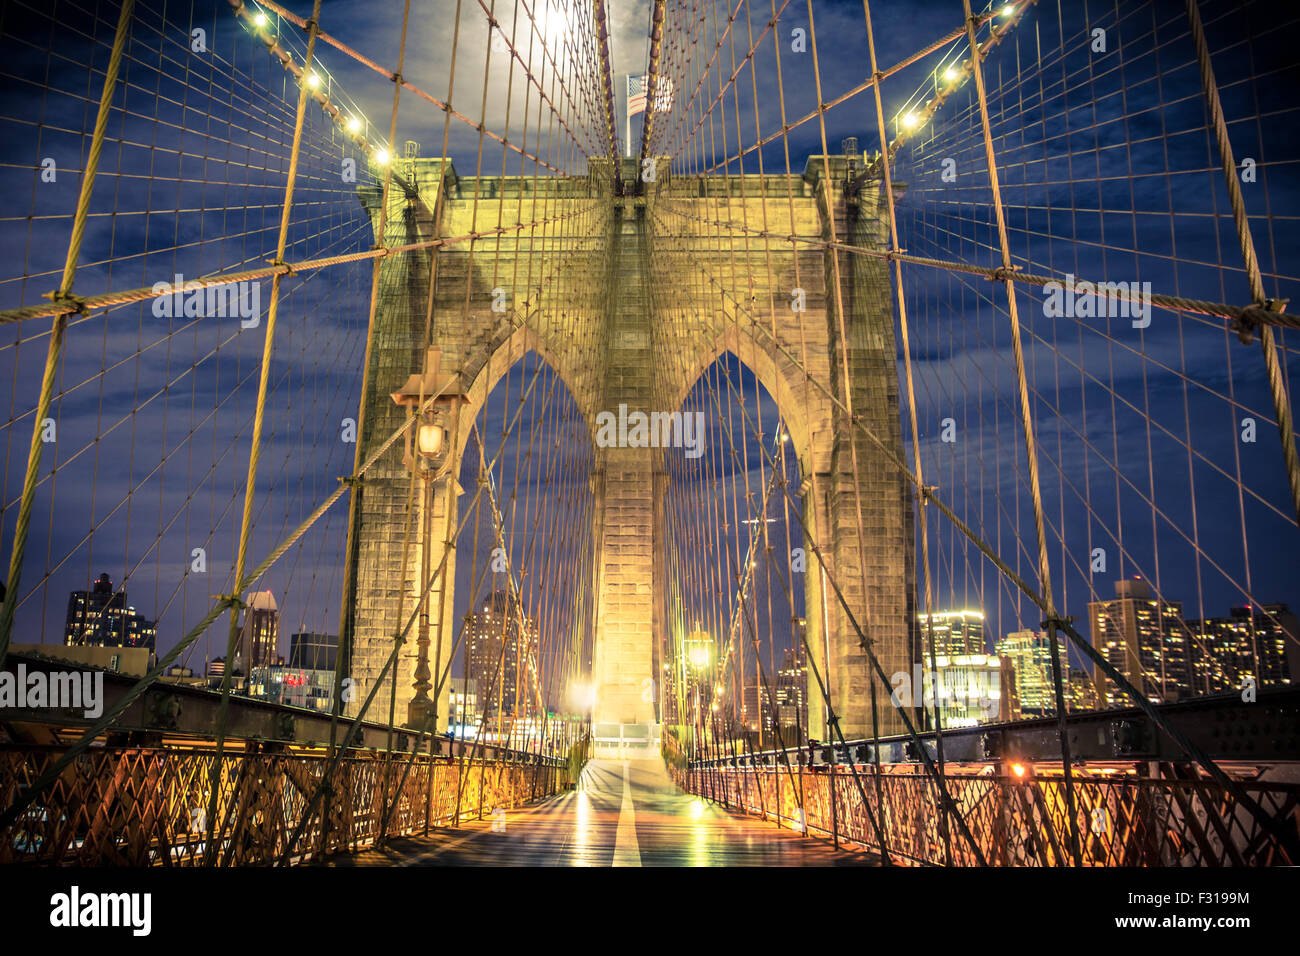 View of historic Brooklyn Bridge at night seen from the pedestrian walkway Stock Photo